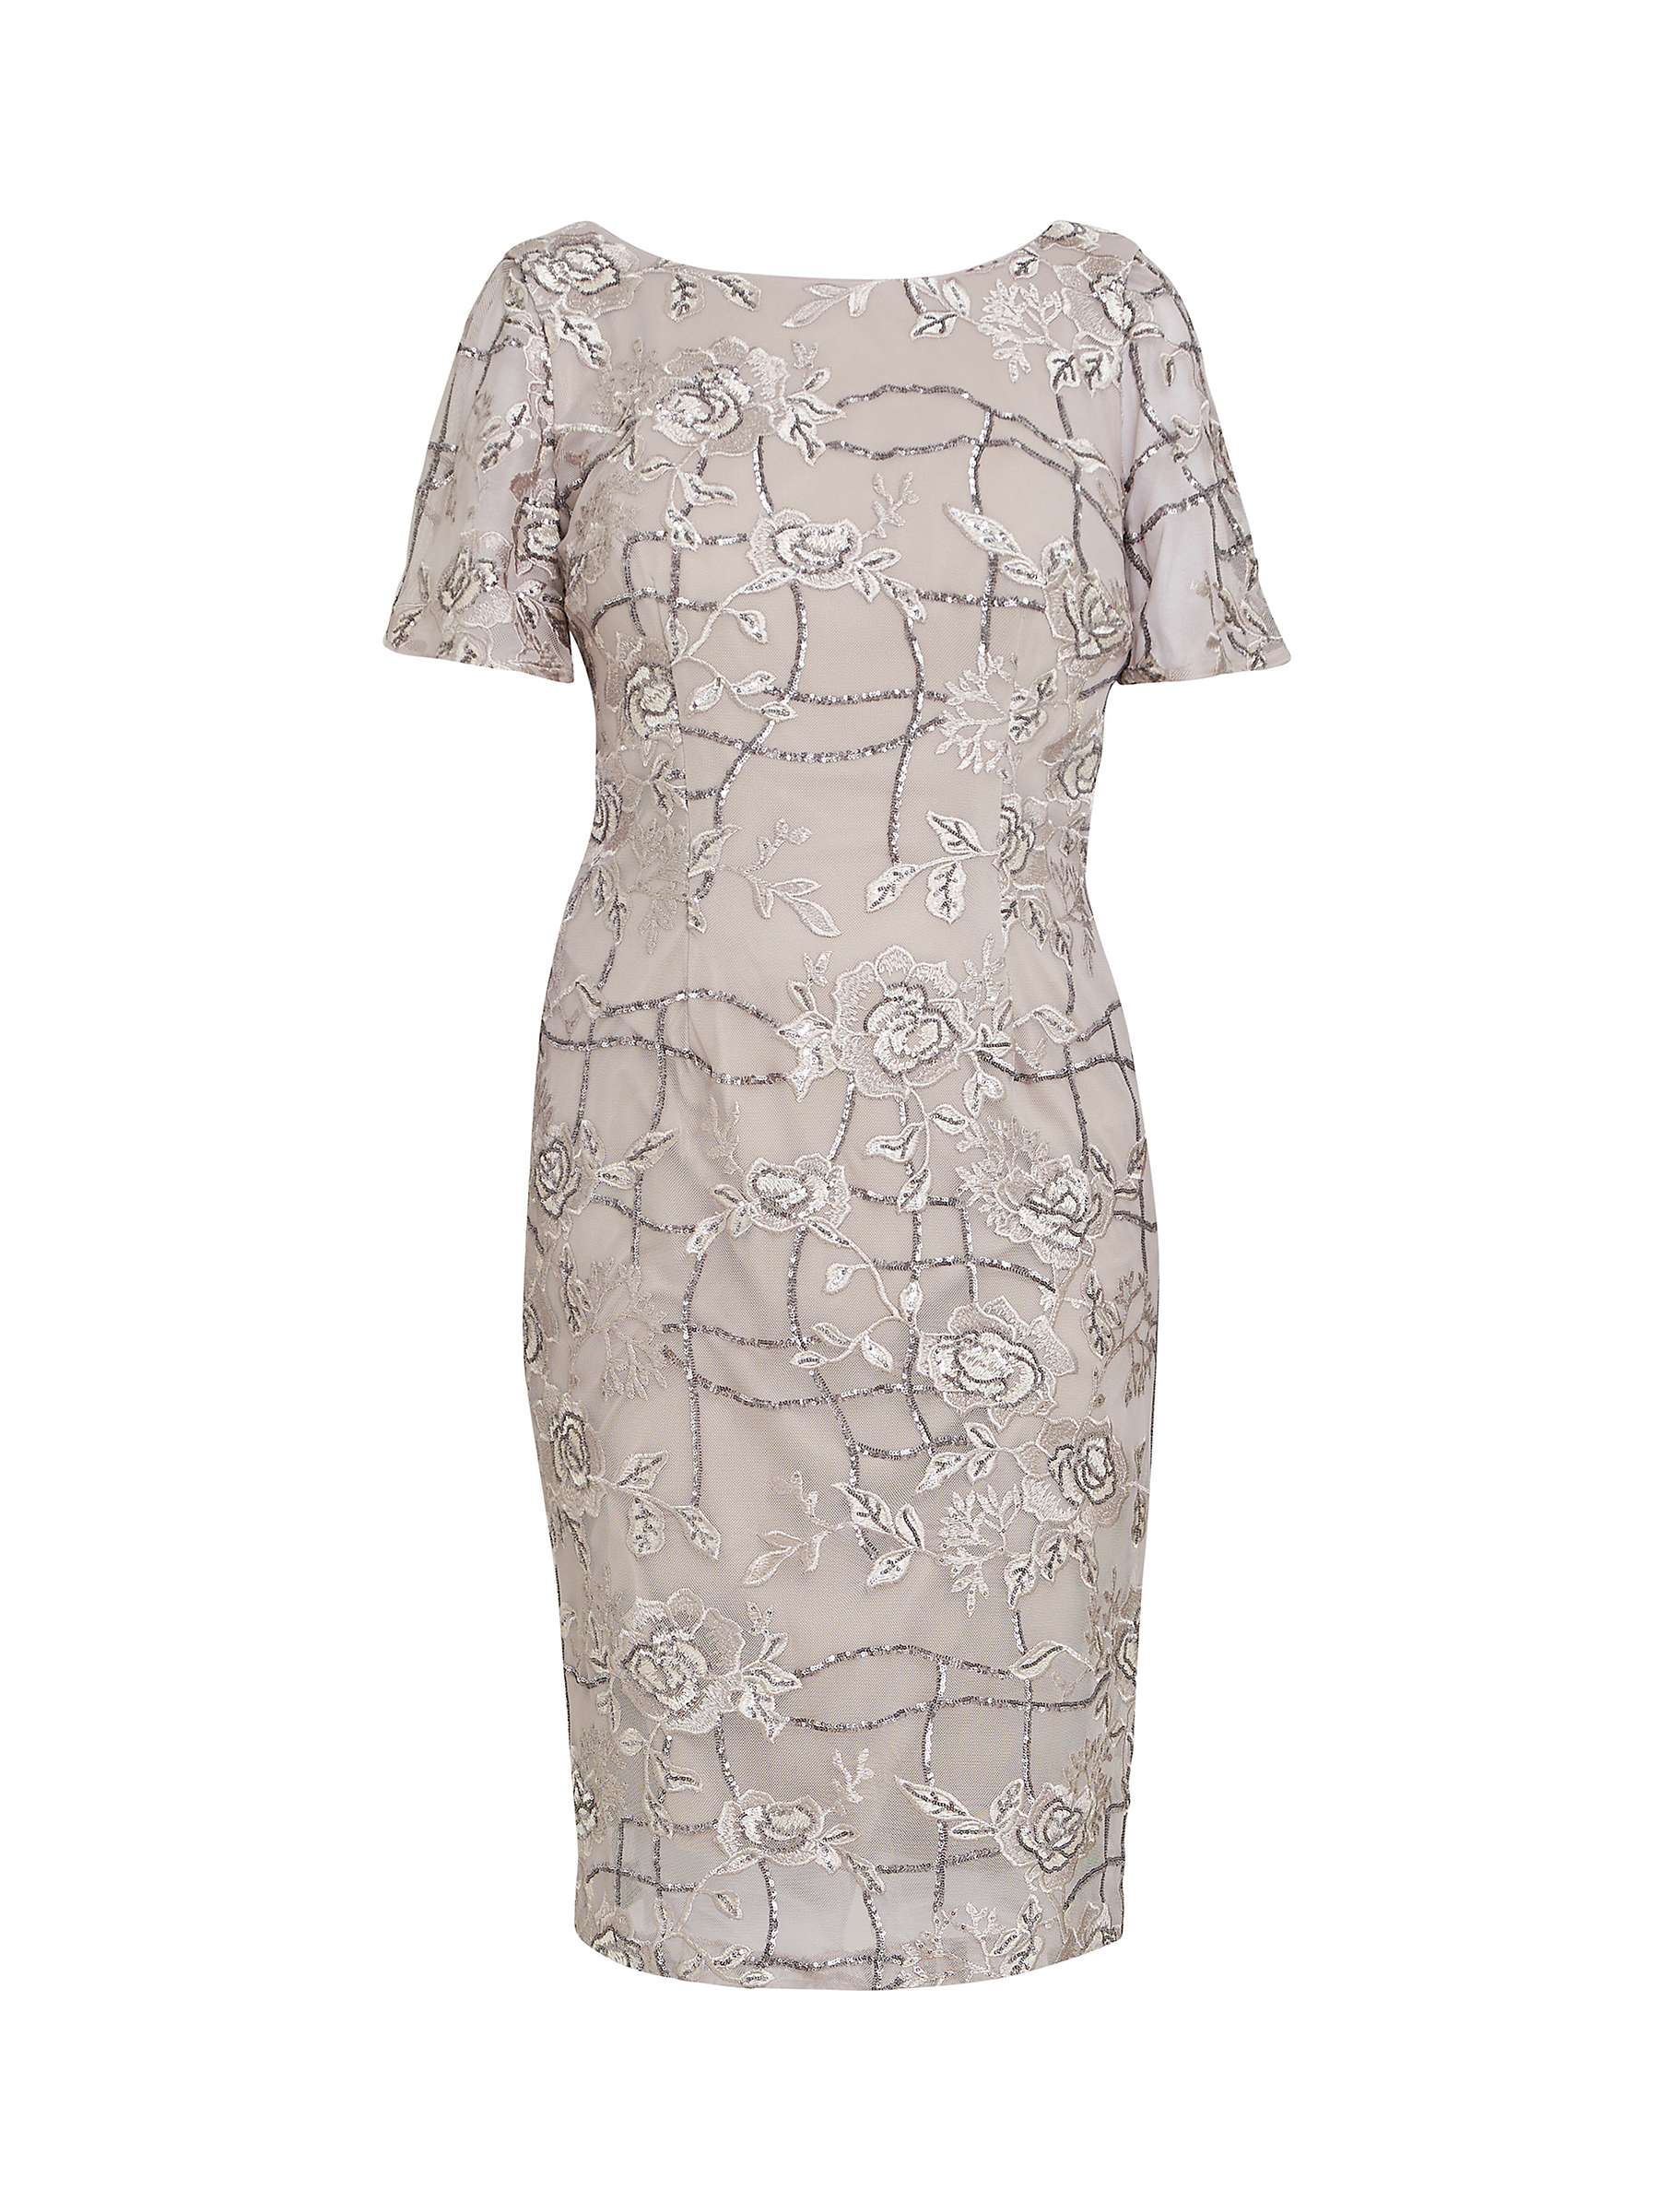 Buy Gina Bacconi Claire Embroidered Shift Dress, Taupe Online at johnlewis.com